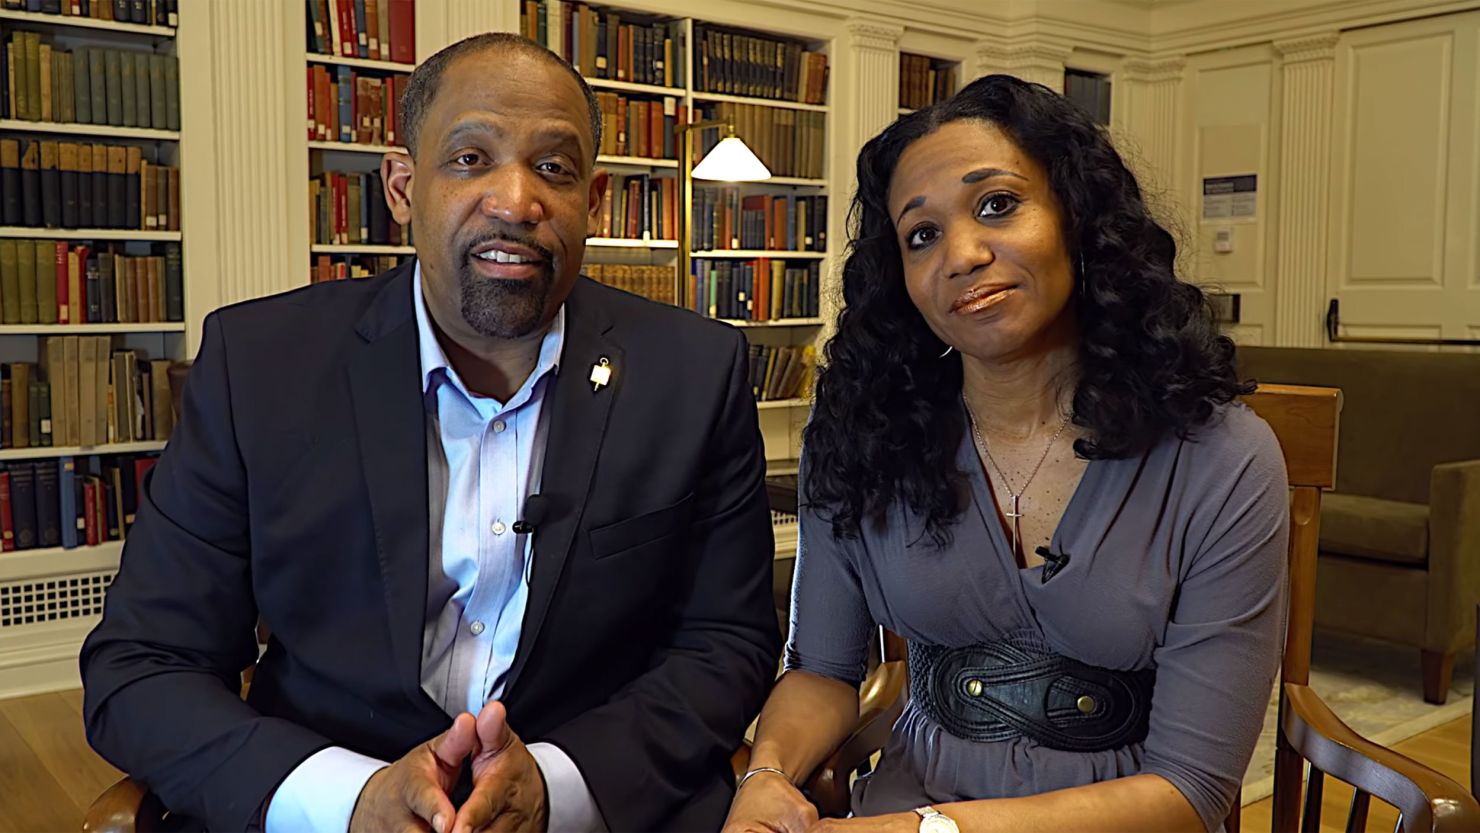 Ronald Sullivan and his wife Stephanie Robinson, who both teach at  Harvard Law School, released a video criticizing Harvard's response to the backlash over his role on Harvey Weinstein's legal team.